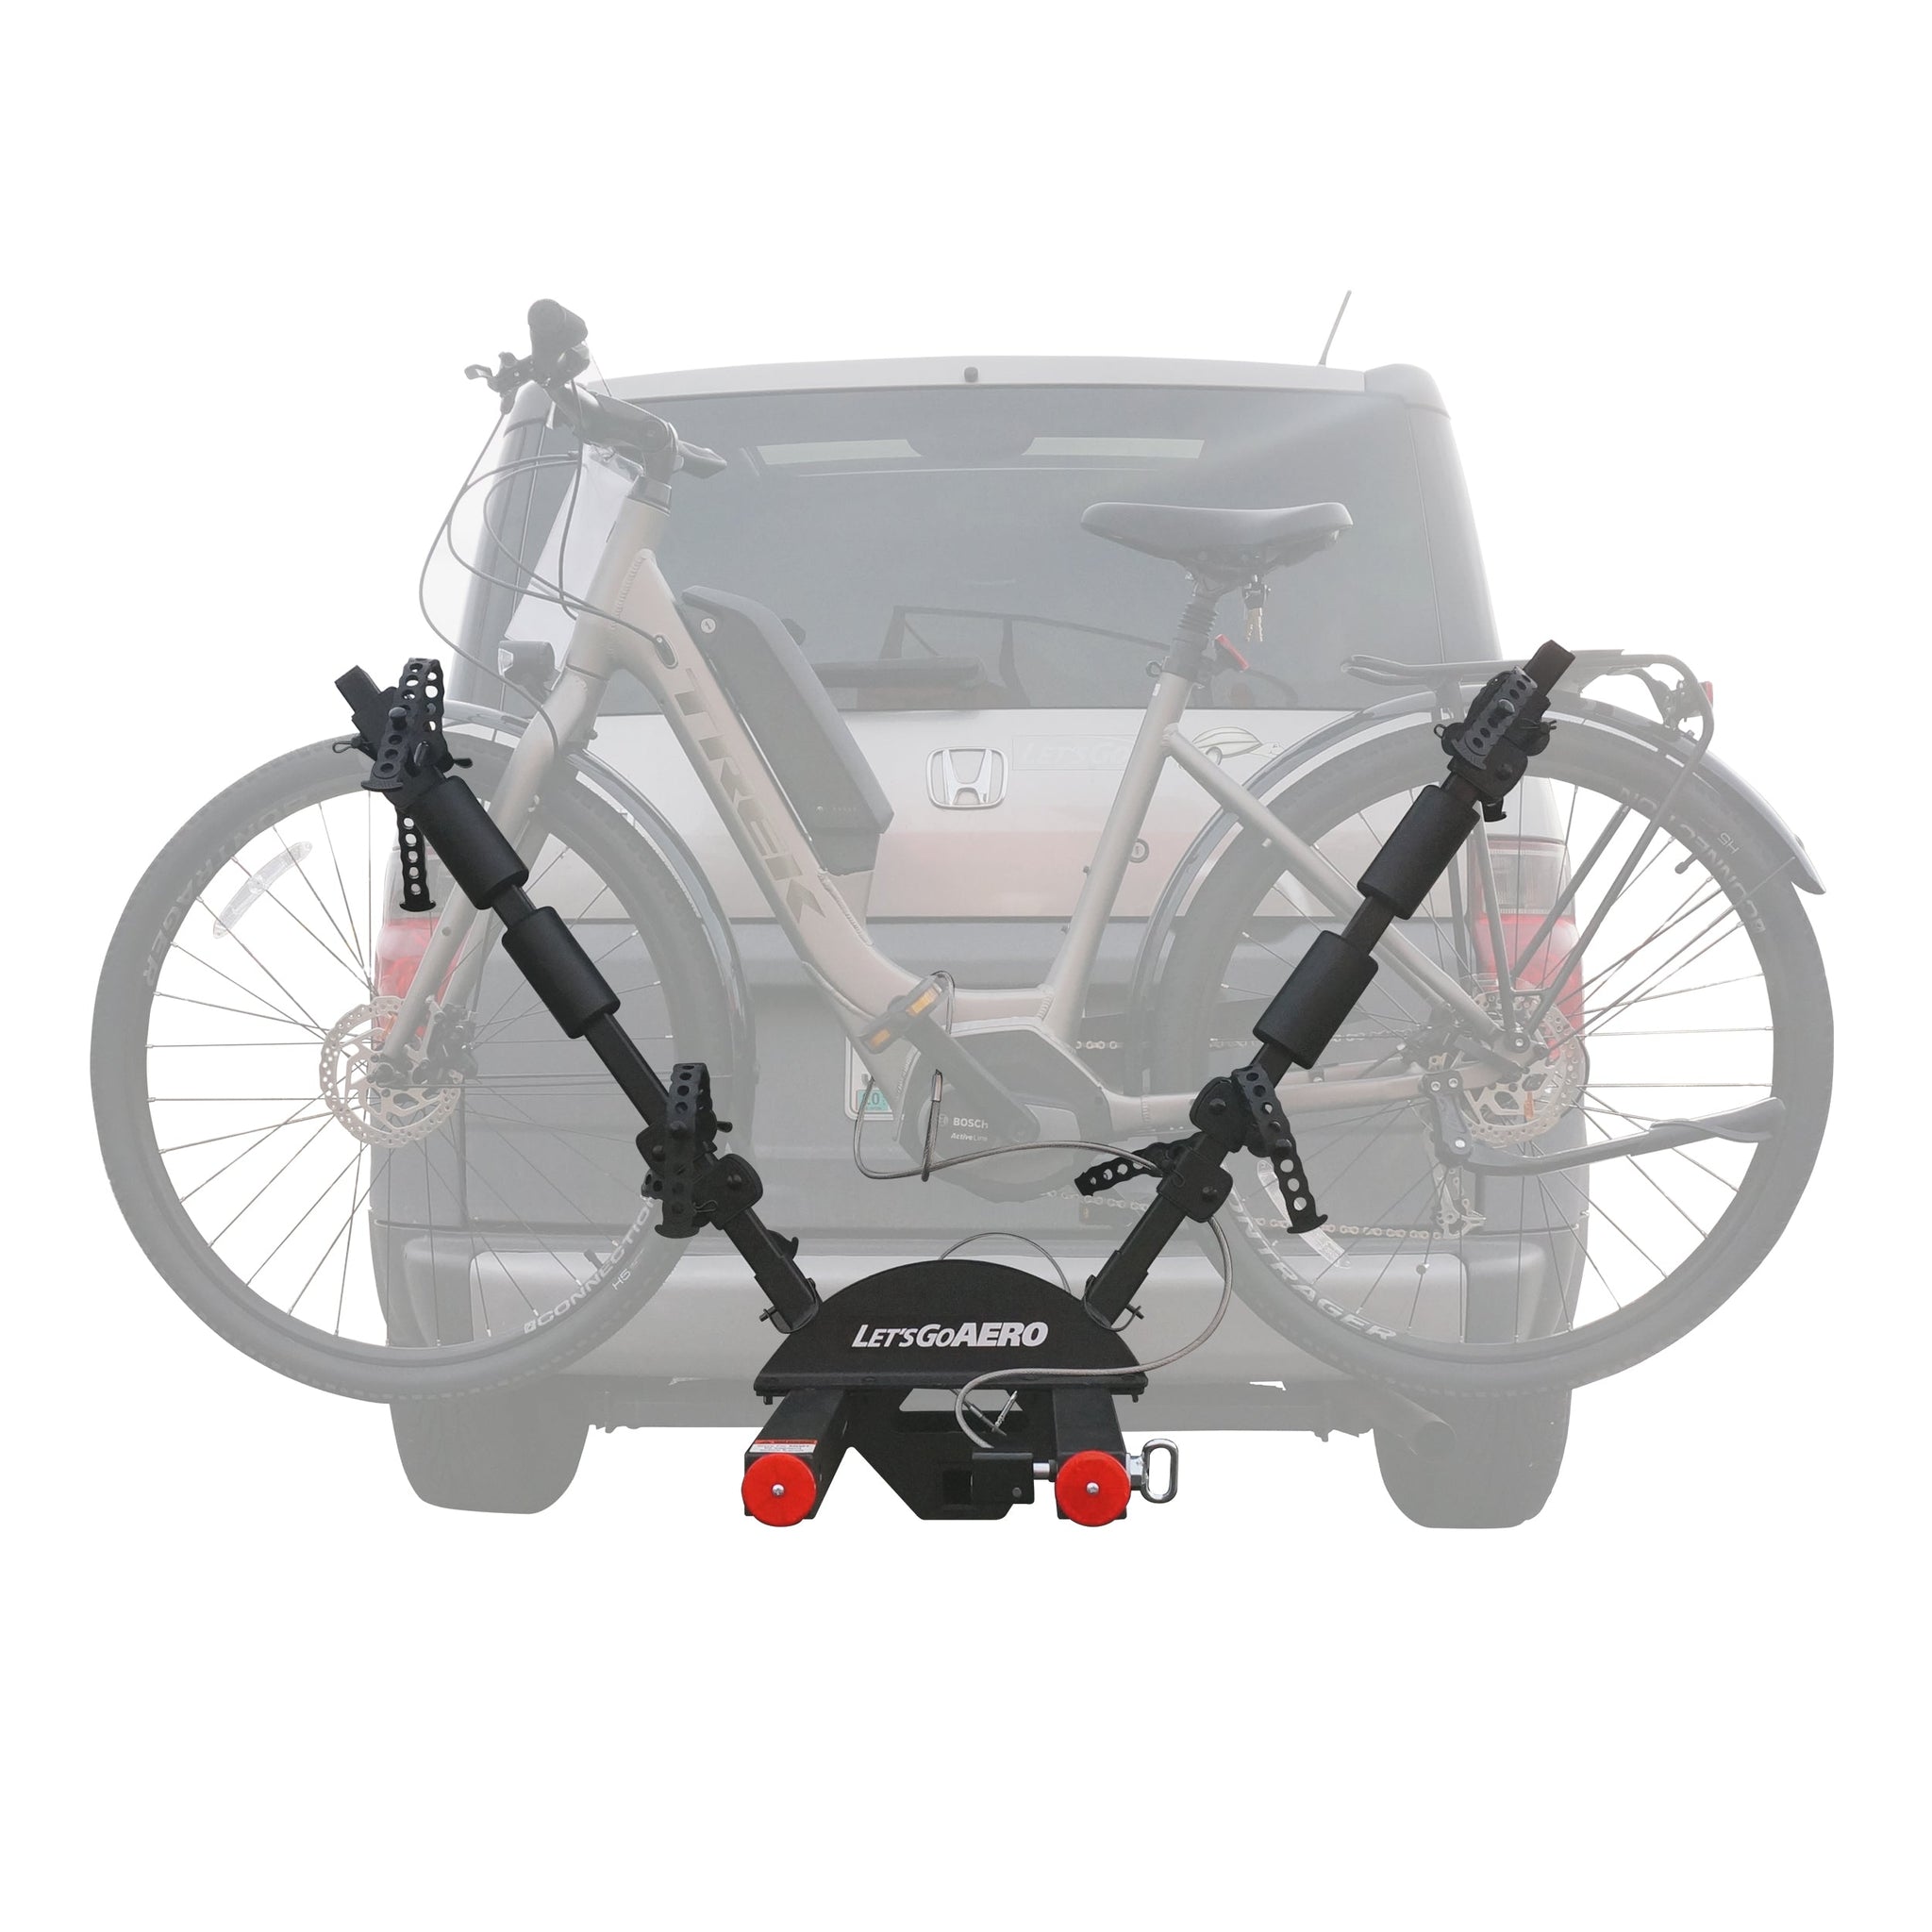 V-Lectric™ 3.0 Slideout Two Bike Carrier – Let's Go Aero